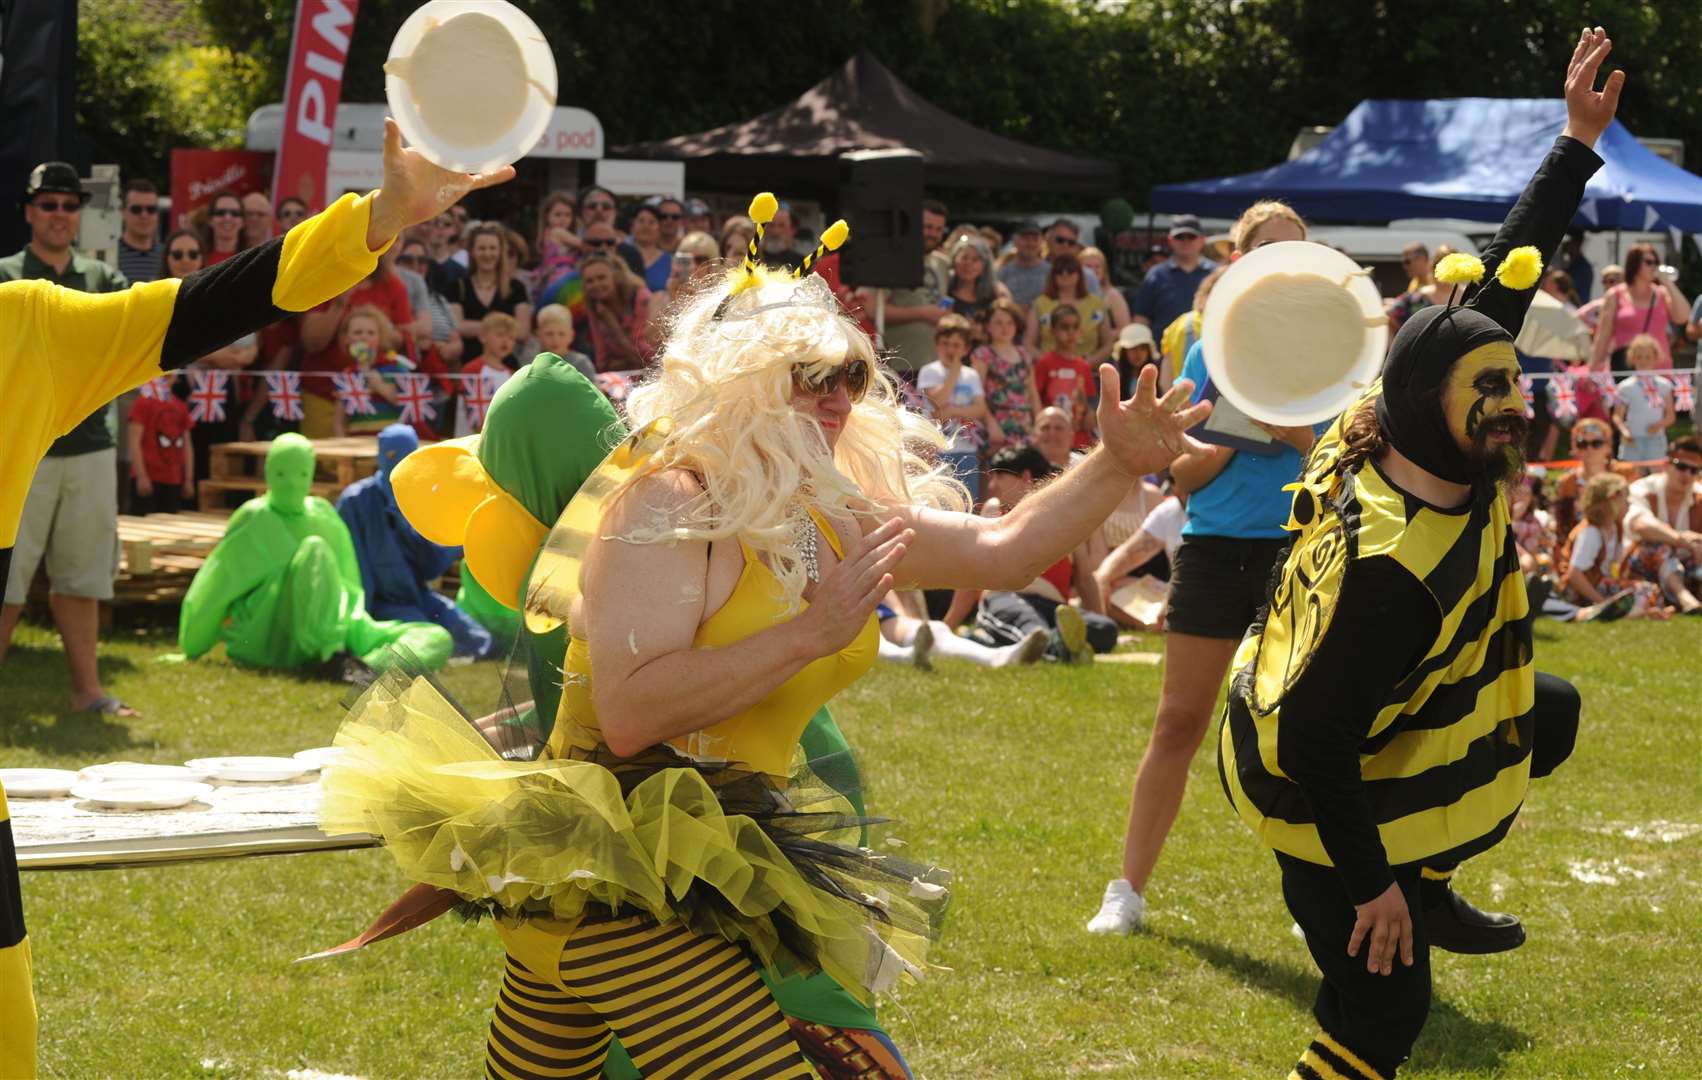 The custard pie throwing competition in Coxheath is a must-see fixture in the calendar. Picture: Steve Crispe